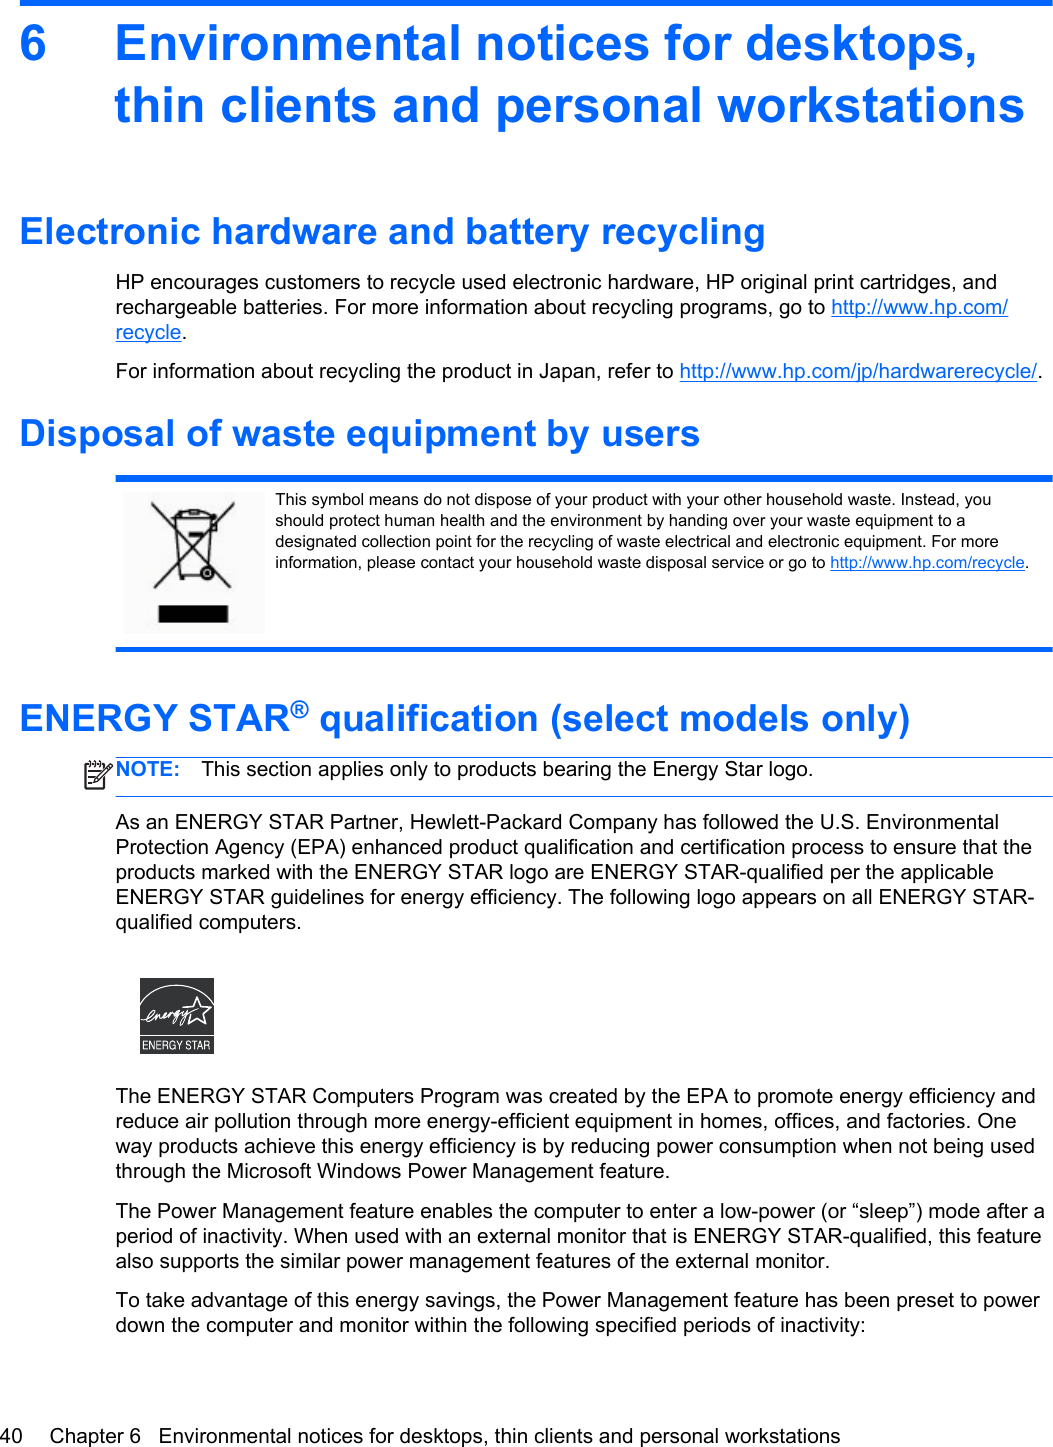 6 Environmental notices for desktops,thin clients and personal workstationsElectronic hardware and battery recyclingHP encourages customers to recycle used electronic hardware, HP original print cartridges, andrechargeable batteries. For more information about recycling programs, go to http://www.hp.com/recycle.For information about recycling the product in Japan, refer to http://www.hp.com/jp/hardwarerecycle/.Disposal of waste equipment by usersThis symbol means do not dispose of your product with your other household waste. Instead, youshould protect human health and the environment by handing over your waste equipment to adesignated collection point for the recycling of waste electrical and electronic equipment. For moreinformation, please contact your household waste disposal service or go to http://www.hp.com/recycle.ENERGY STAR® qualification (select models only)NOTE: This section applies only to products bearing the Energy Star logo.As an ENERGY STAR Partner, Hewlett-Packard Company has followed the U.S. EnvironmentalProtection Agency (EPA) enhanced product qualification and certification process to ensure that theproducts marked with the ENERGY STAR logo are ENERGY STAR-qualified per the applicableENERGY STAR guidelines for energy efficiency. The following logo appears on all ENERGY STAR-qualified computers.The ENERGY STAR Computers Program was created by the EPA to promote energy efficiency andreduce air pollution through more energy-efficient equipment in homes, offices, and factories. Oneway products achieve this energy efficiency is by reducing power consumption when not being usedthrough the Microsoft Windows Power Management feature.The Power Management feature enables the computer to enter a low-power (or “sleep”) mode after aperiod of inactivity. When used with an external monitor that is ENERGY STAR-qualified, this featurealso supports the similar power management features of the external monitor.To take advantage of this energy savings, the Power Management feature has been preset to powerdown the computer and monitor within the following specified periods of inactivity:40 Chapter 6   Environmental notices for desktops, thin clients and personal workstations